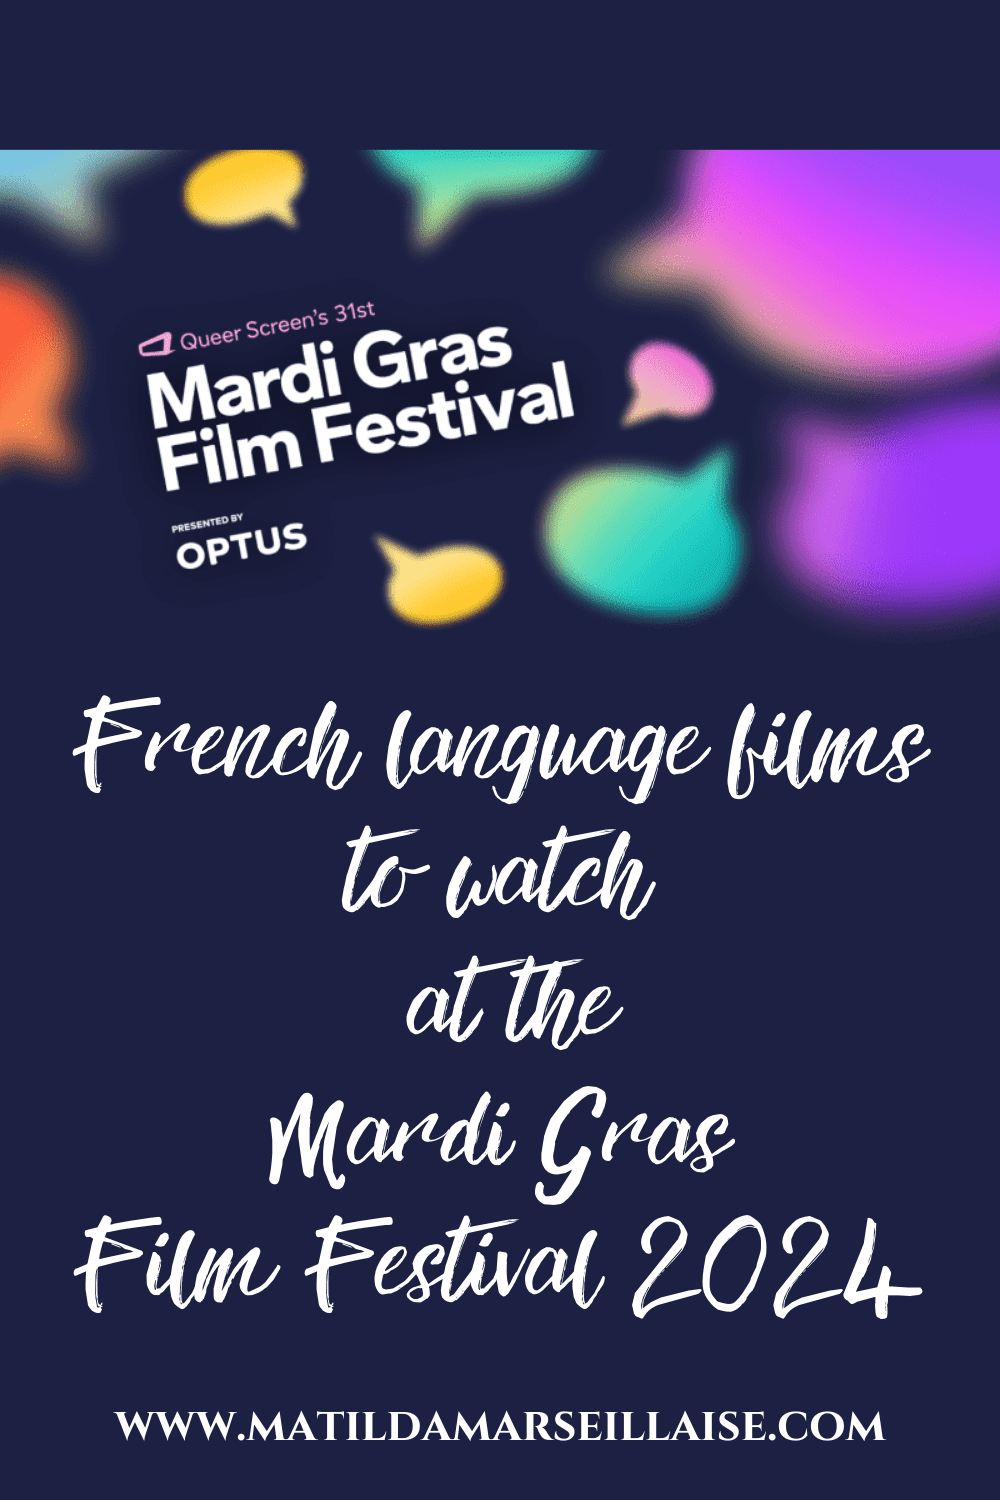 Mardi Gras Film Festival 2024 brings a variety of French language films to Sydney screens